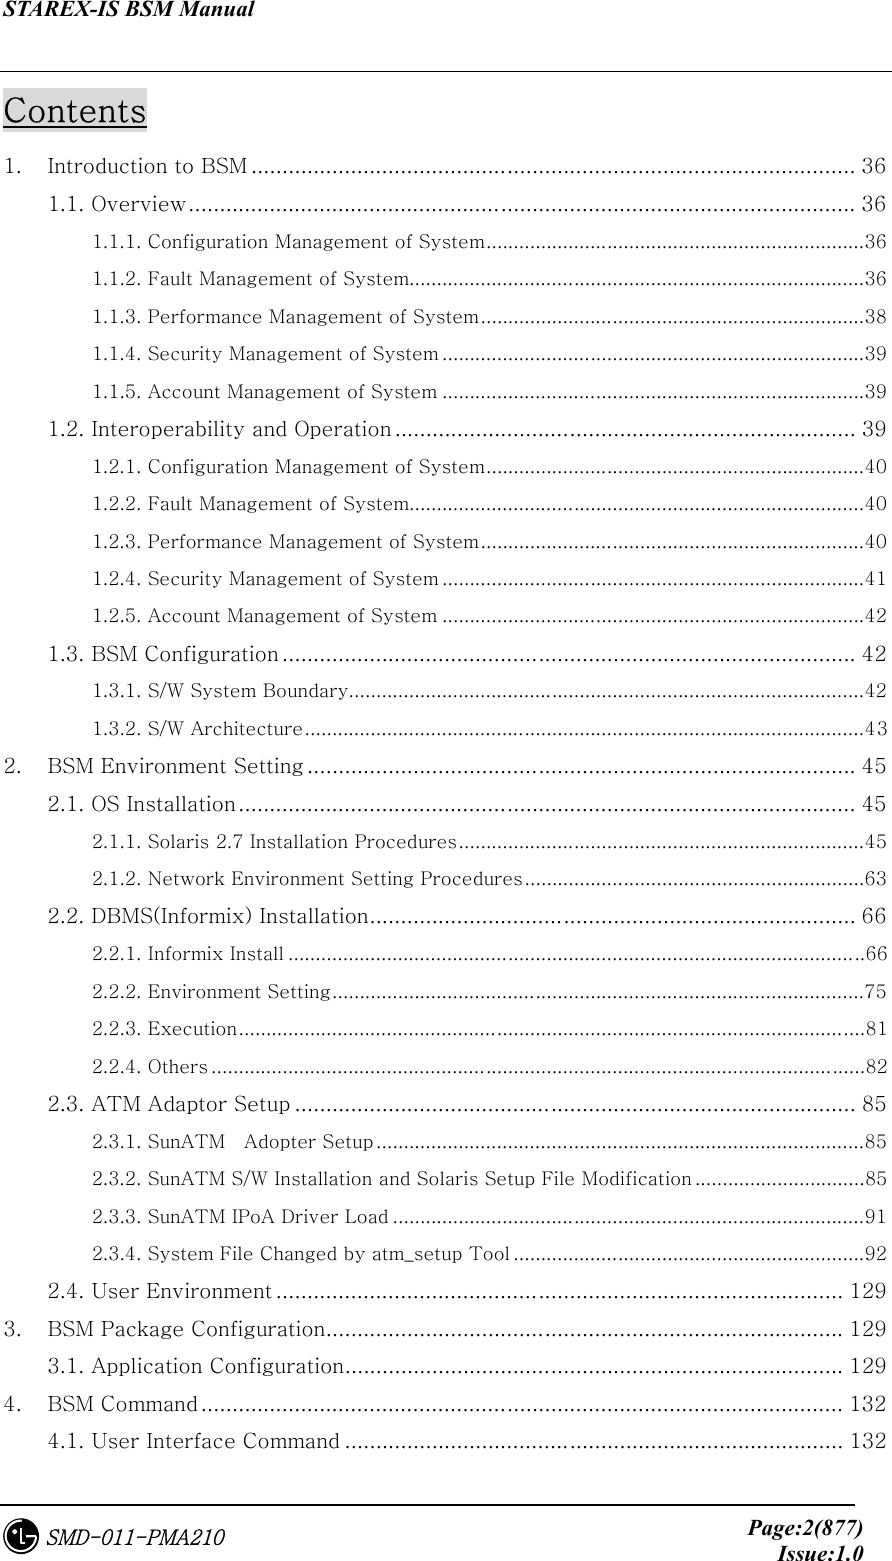 STAREX-IS BSM Manual     Page:2(877)Issue:1.0SMD-011-PMA210 Contents 1.  Introduction to BSM ................................................................................................. 36 1.1. Overview........................................................................................................... 36 1.1.1. Configuration Management of System.....................................................................36 1.1.2. Fault Management of System...................................................................................36 1.1.3. Performance Management of System......................................................................38 1.1.4. Security Management of System .............................................................................39 1.1.5. Account Management of System .............................................................................39 1.2. Interoperability and Operation .......................................................................... 39 1.2.1. Configuration Management of System.....................................................................40 1.2.2. Fault Management of System...................................................................................40 1.2.3. Performance Management of System......................................................................40 1.2.4. Security Management of System .............................................................................41 1.2.5. Account Management of System .............................................................................42 1.3. BSM Configuration............................................................................................ 42 1.3.1. S/W System Boundary..............................................................................................42 1.3.2. S/W Architecture......................................................................................................43 2.  BSM Environment Setting ........................................................................................ 45 2.1. OS Installation................................................................................................... 45 2.1.1. Solaris 2.7 Installation Procedures..........................................................................45 2.1.2. Network Environment Setting Procedures..............................................................63 2.2. DBMS(Informix) Installation.............................................................................. 66 2.2.1. Informix Install .........................................................................................................66 2.2.2. Environment Setting.................................................................................................75 2.2.3. Execution..................................................................................................................81 2.2.4. Others .......................................................................................................................82 2.3. ATM Adaptor Setup .......................................................................................... 85 2.3.1. SunATM    Adopter Setup .........................................................................................85 2.3.2. SunATM S/W Installation and Solaris Setup File Modification ...............................85 2.3.3. SunATM IPoA Driver Load ......................................................................................91 2.3.4. System File Changed by atm_setup Tool ................................................................92 2.4. User Environment ........................................................................................... 129 3.  BSM Package Configuration................................................................................... 129 3.1. Application Configuration................................................................................ 129 4.  BSM Command ....................................................................................................... 132 4.1. User Interface Command ................................................................................ 132 